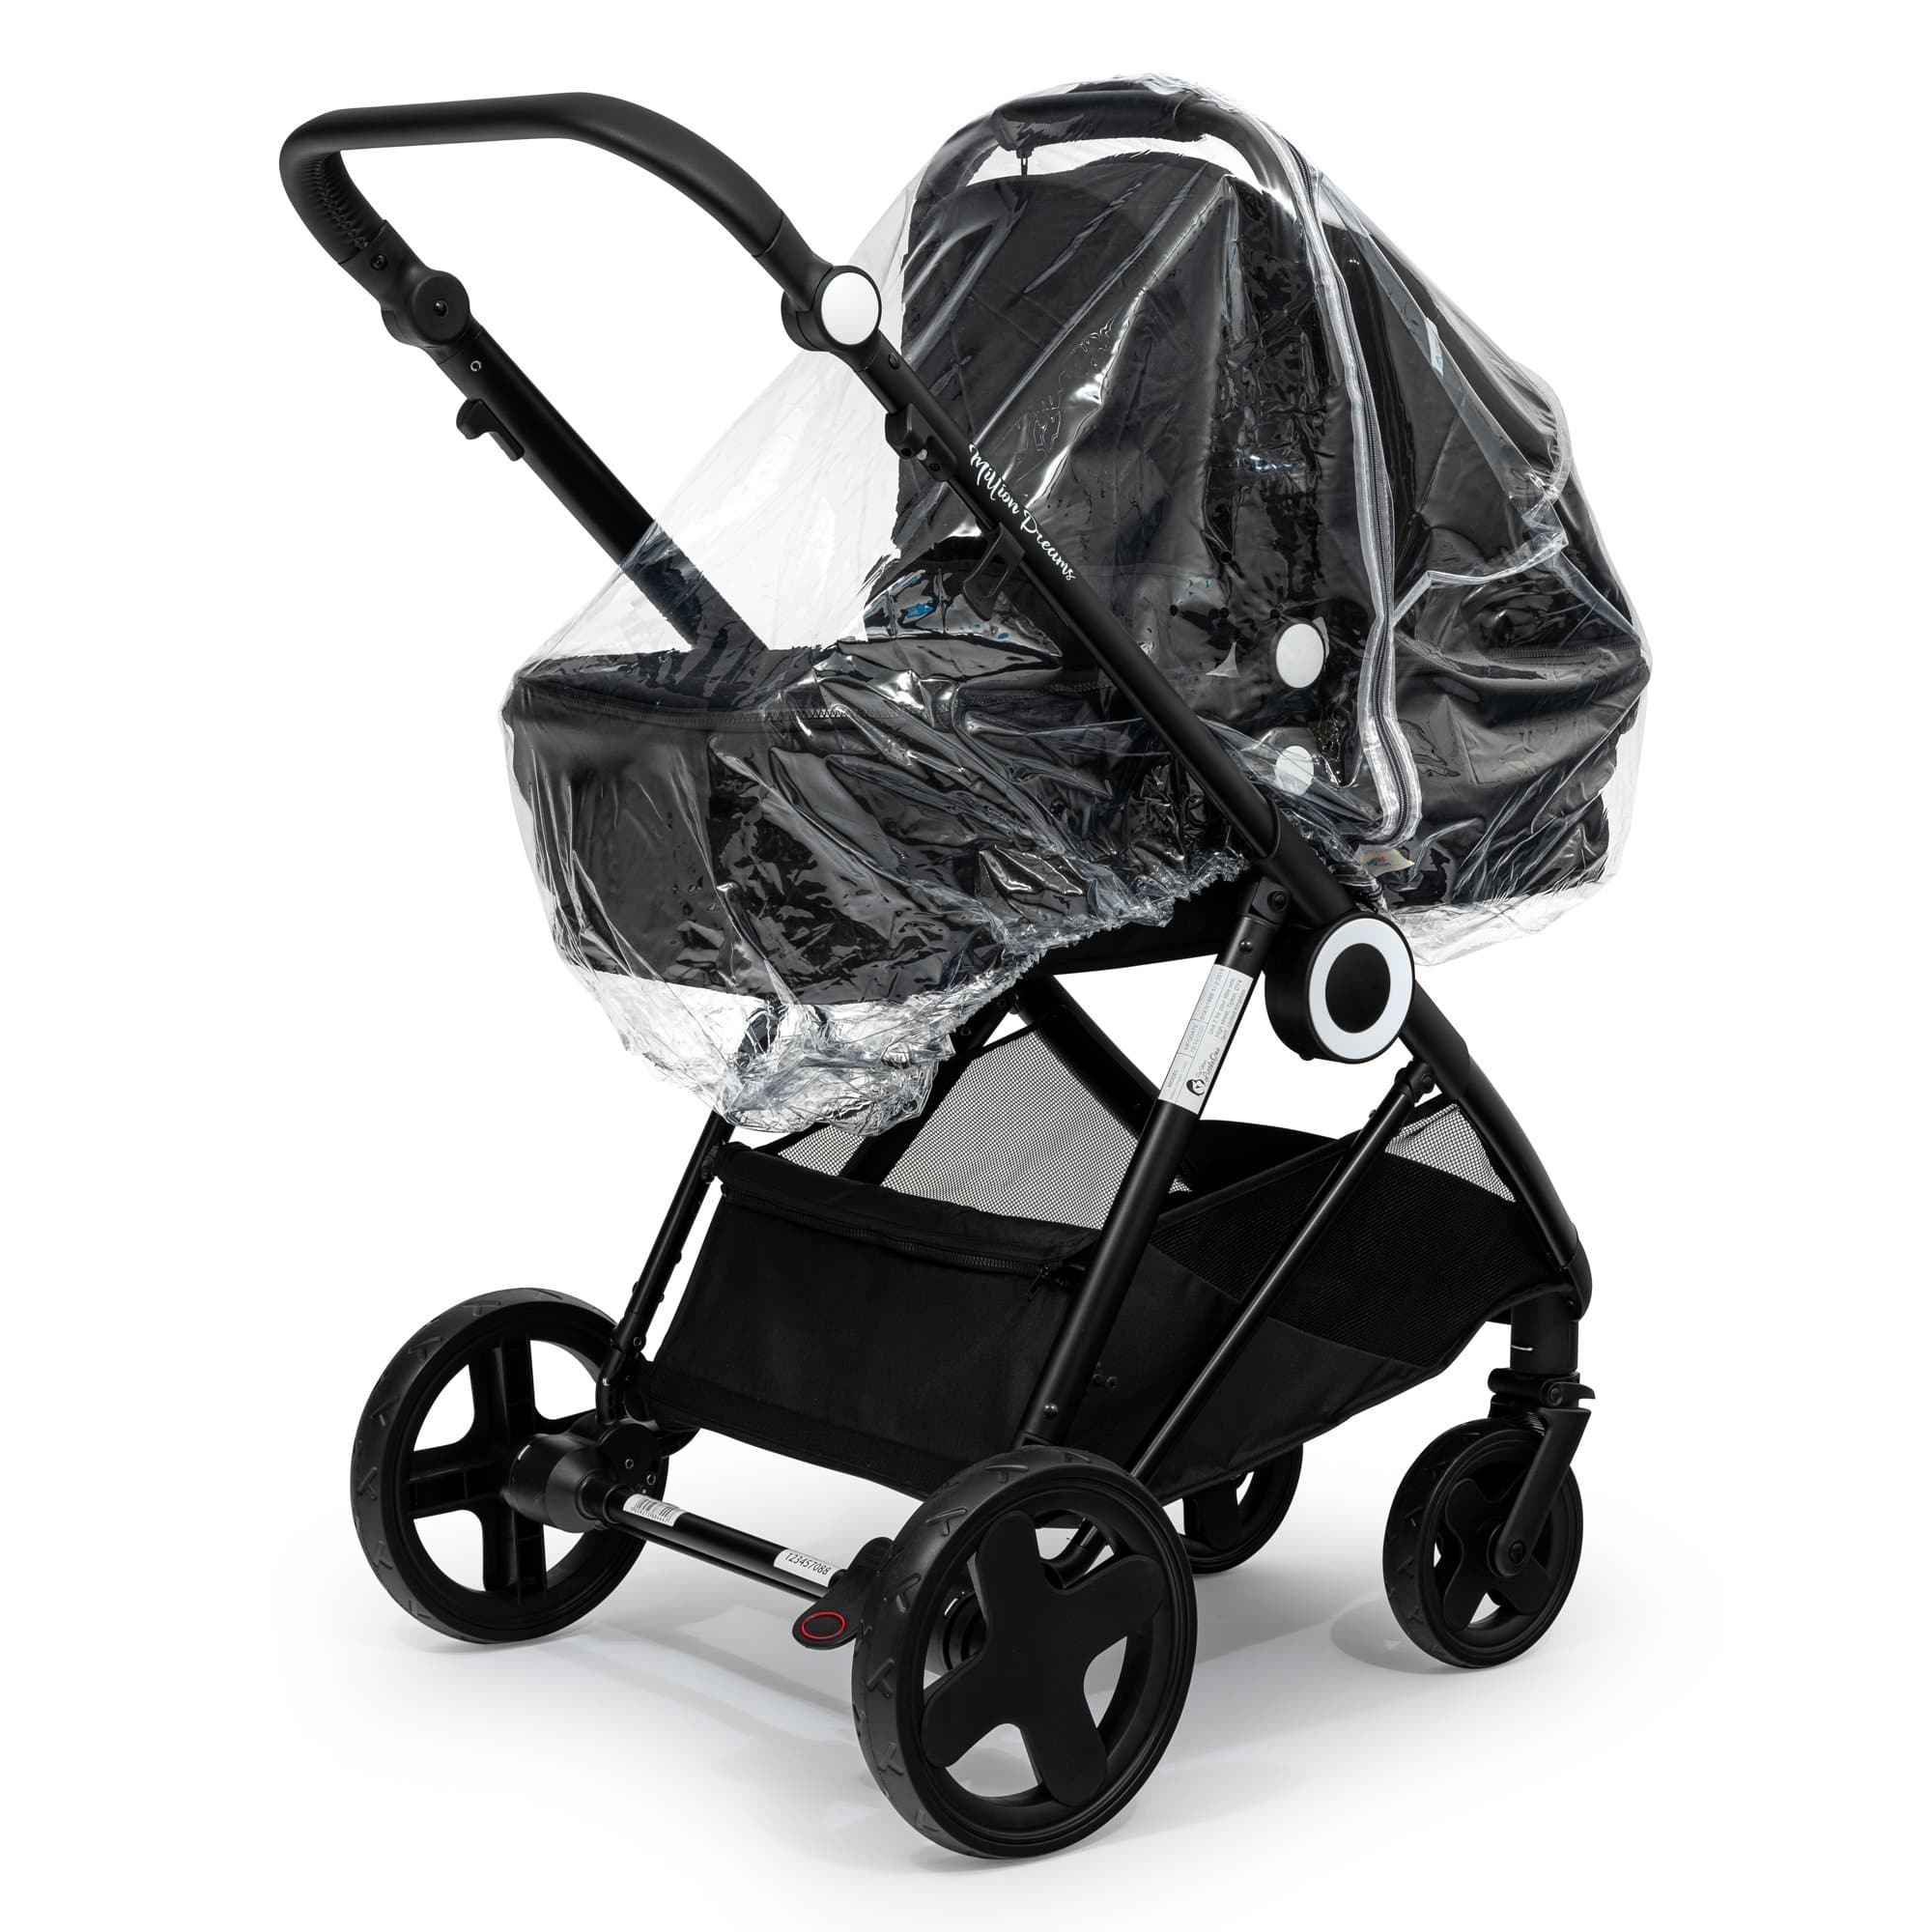 2 in 1 Rain Cover Compatible with Casual - Fits All Models - For Your Little One